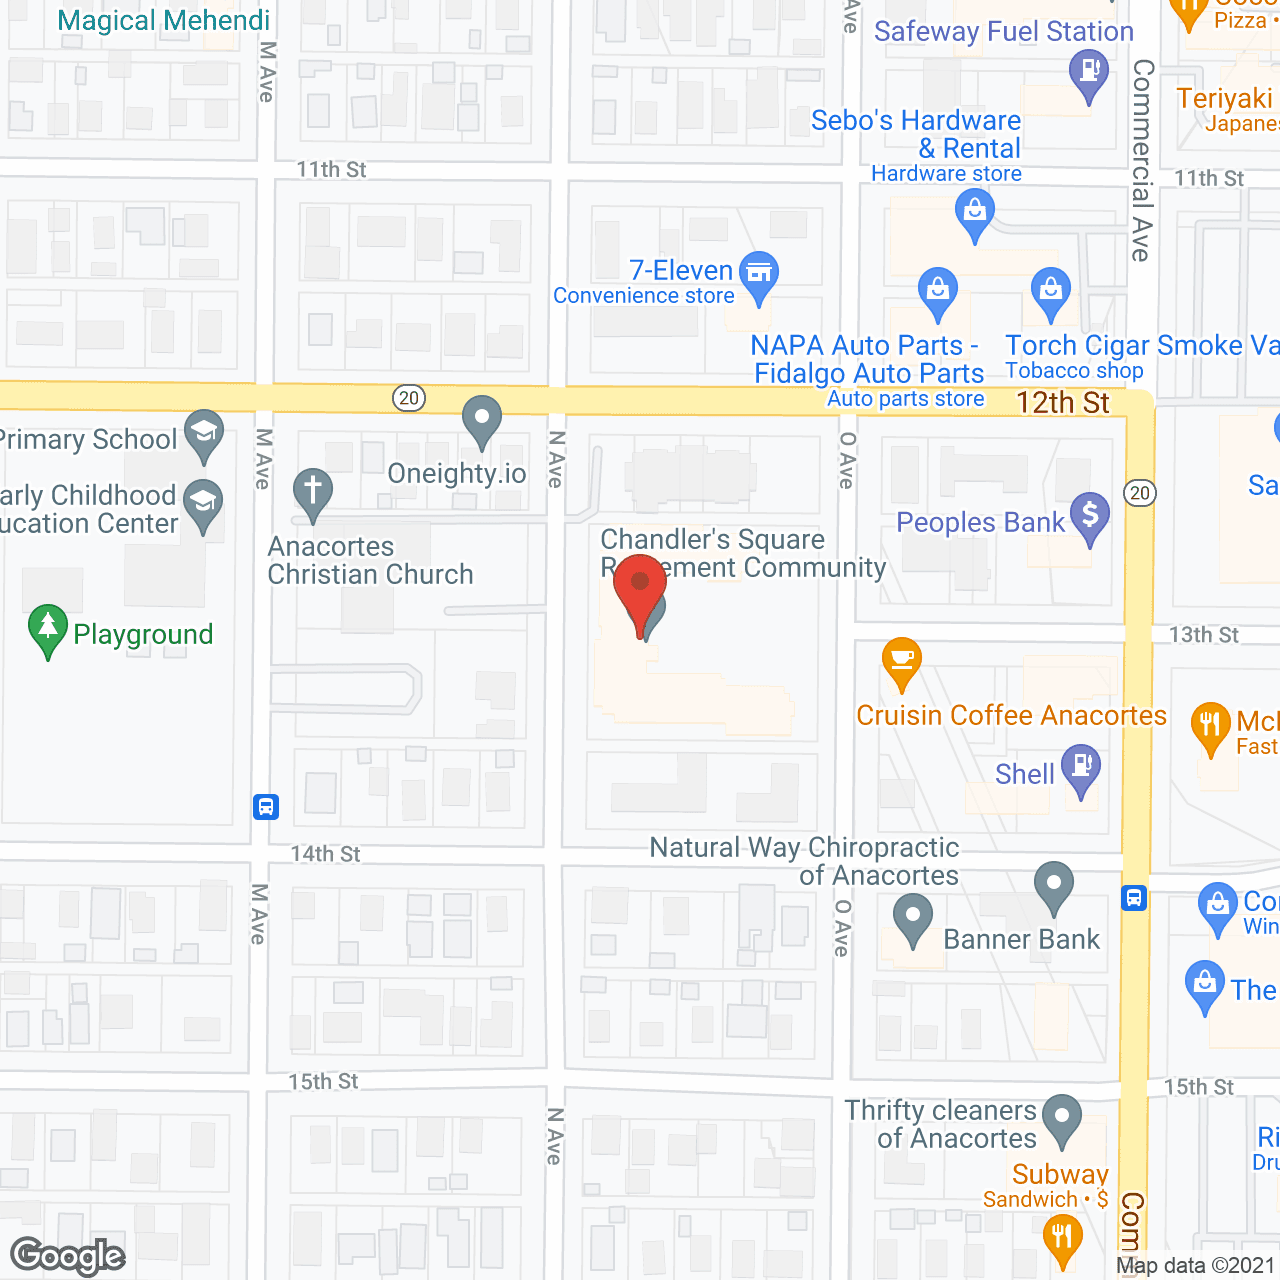 Chandler's Square in google map